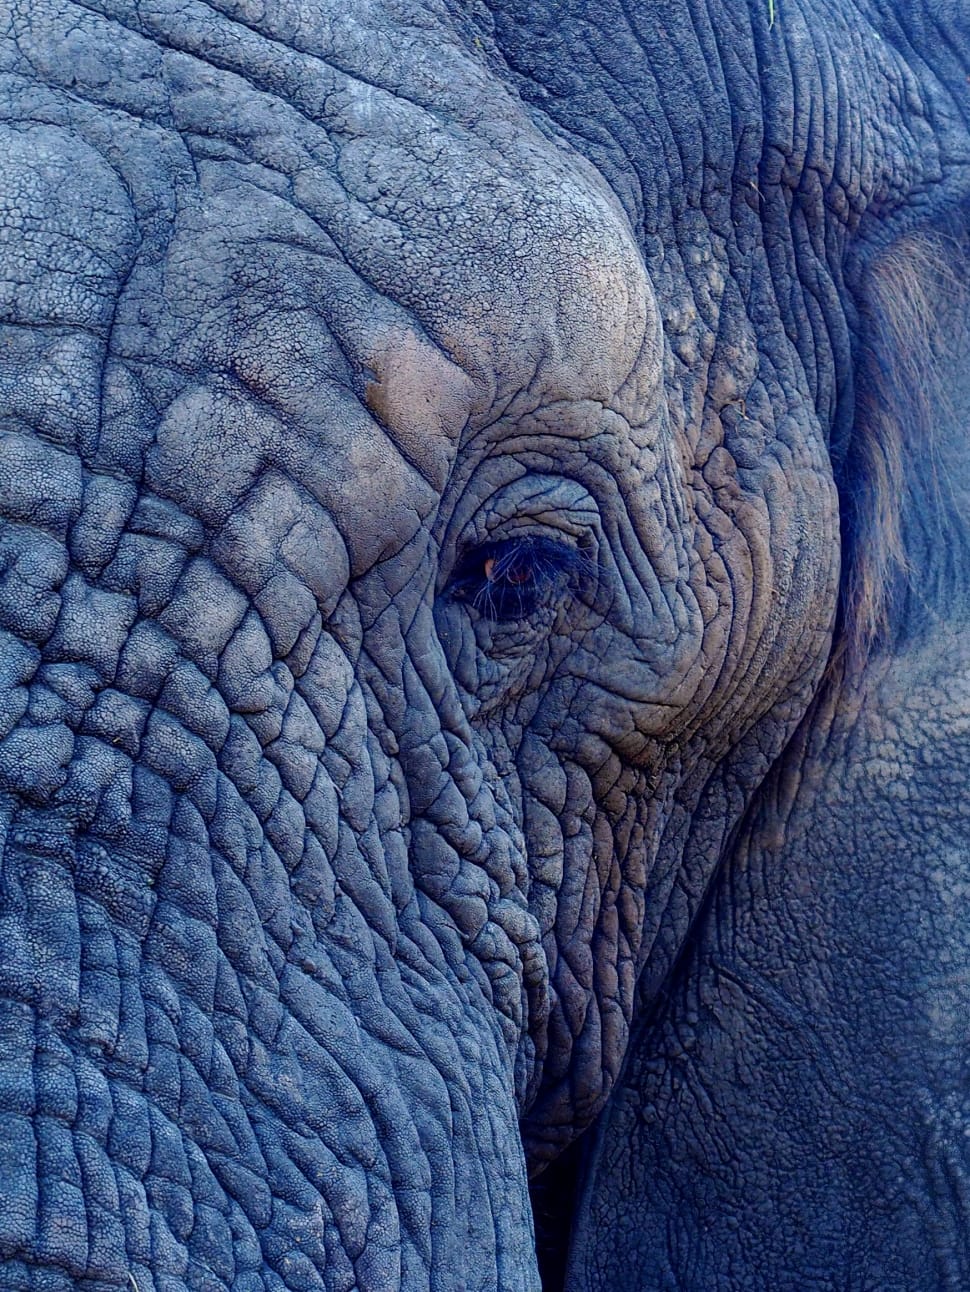 close-up photo of grey elephant preview